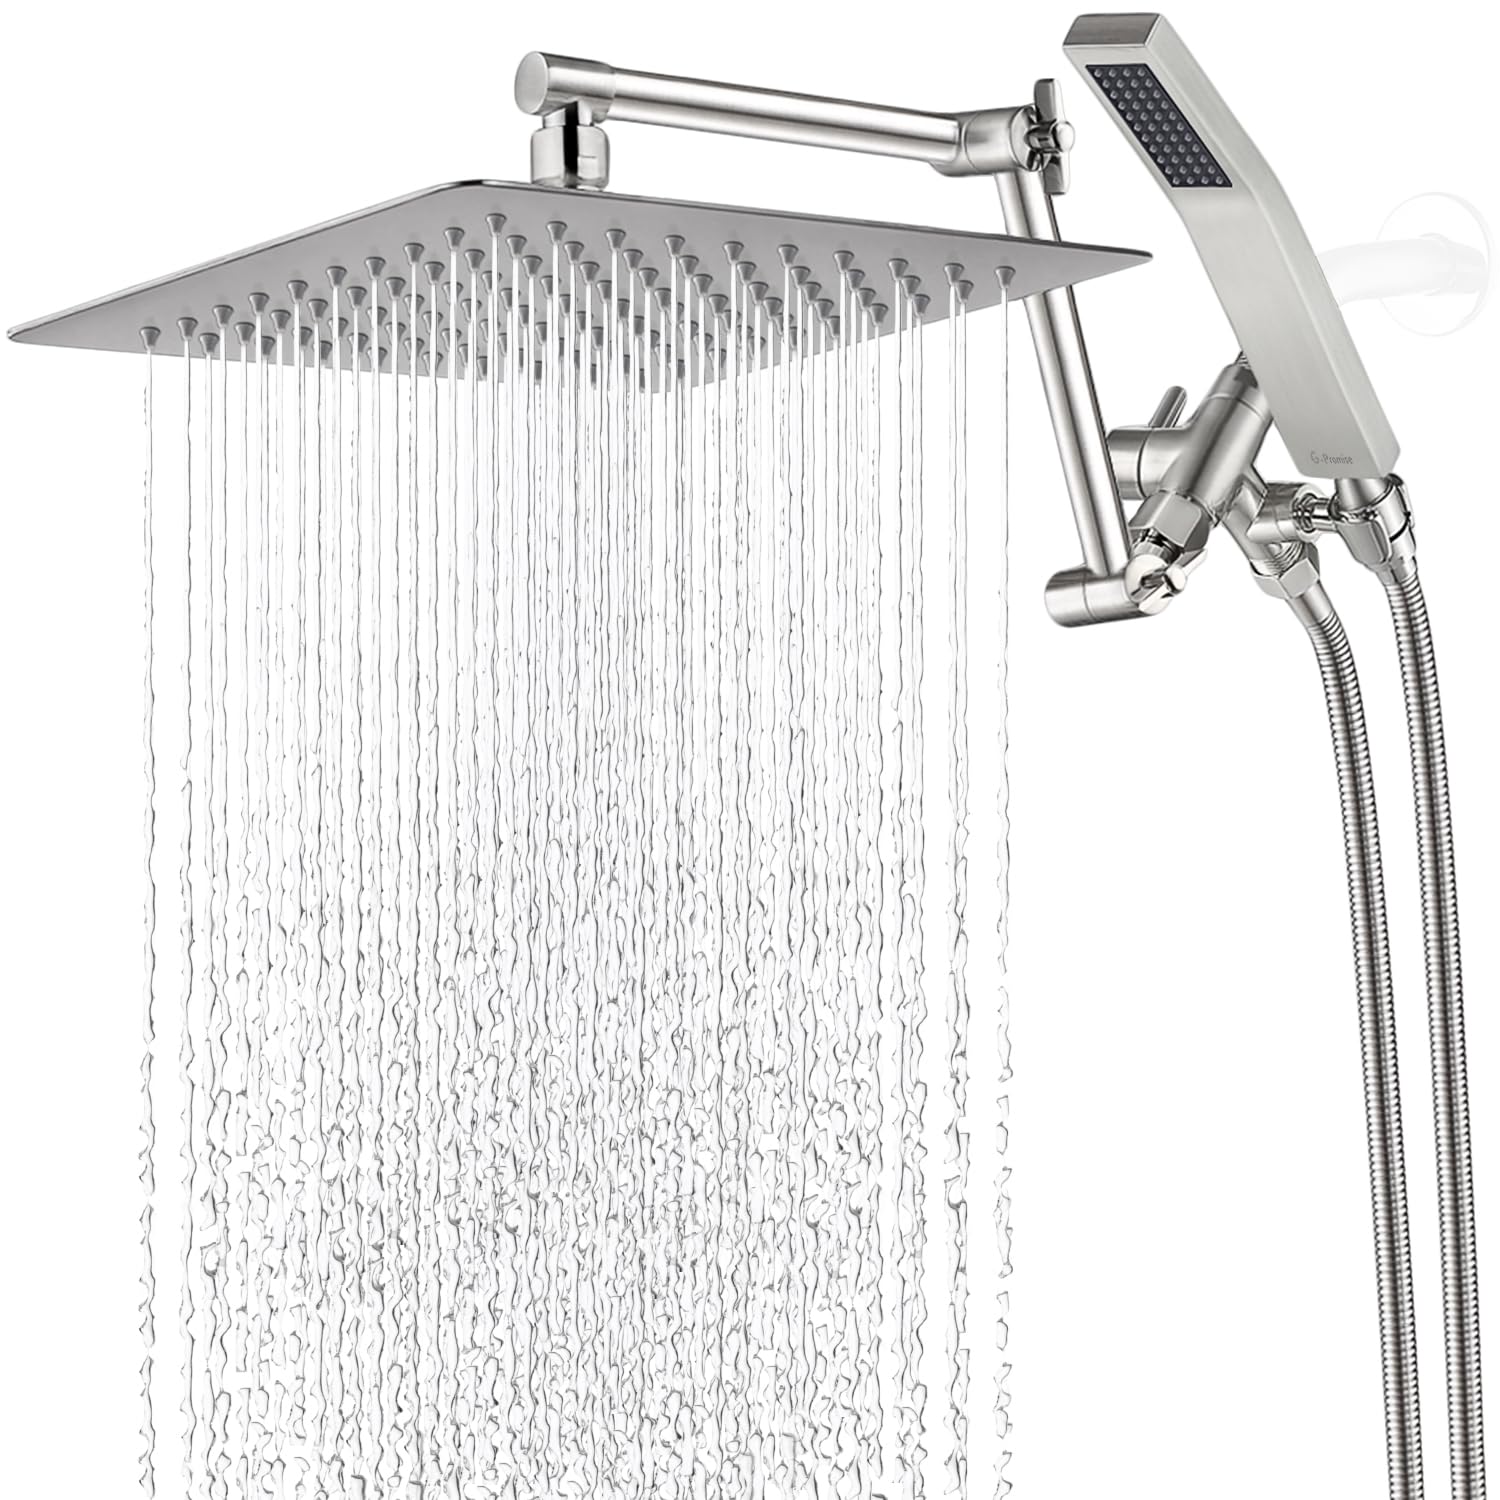 G-Promise All Metal 10 Inch Rainfall Shower Head with Handheld Spray Combo| 3 Settings Diverter|Adjustable Extension Arm with Lo